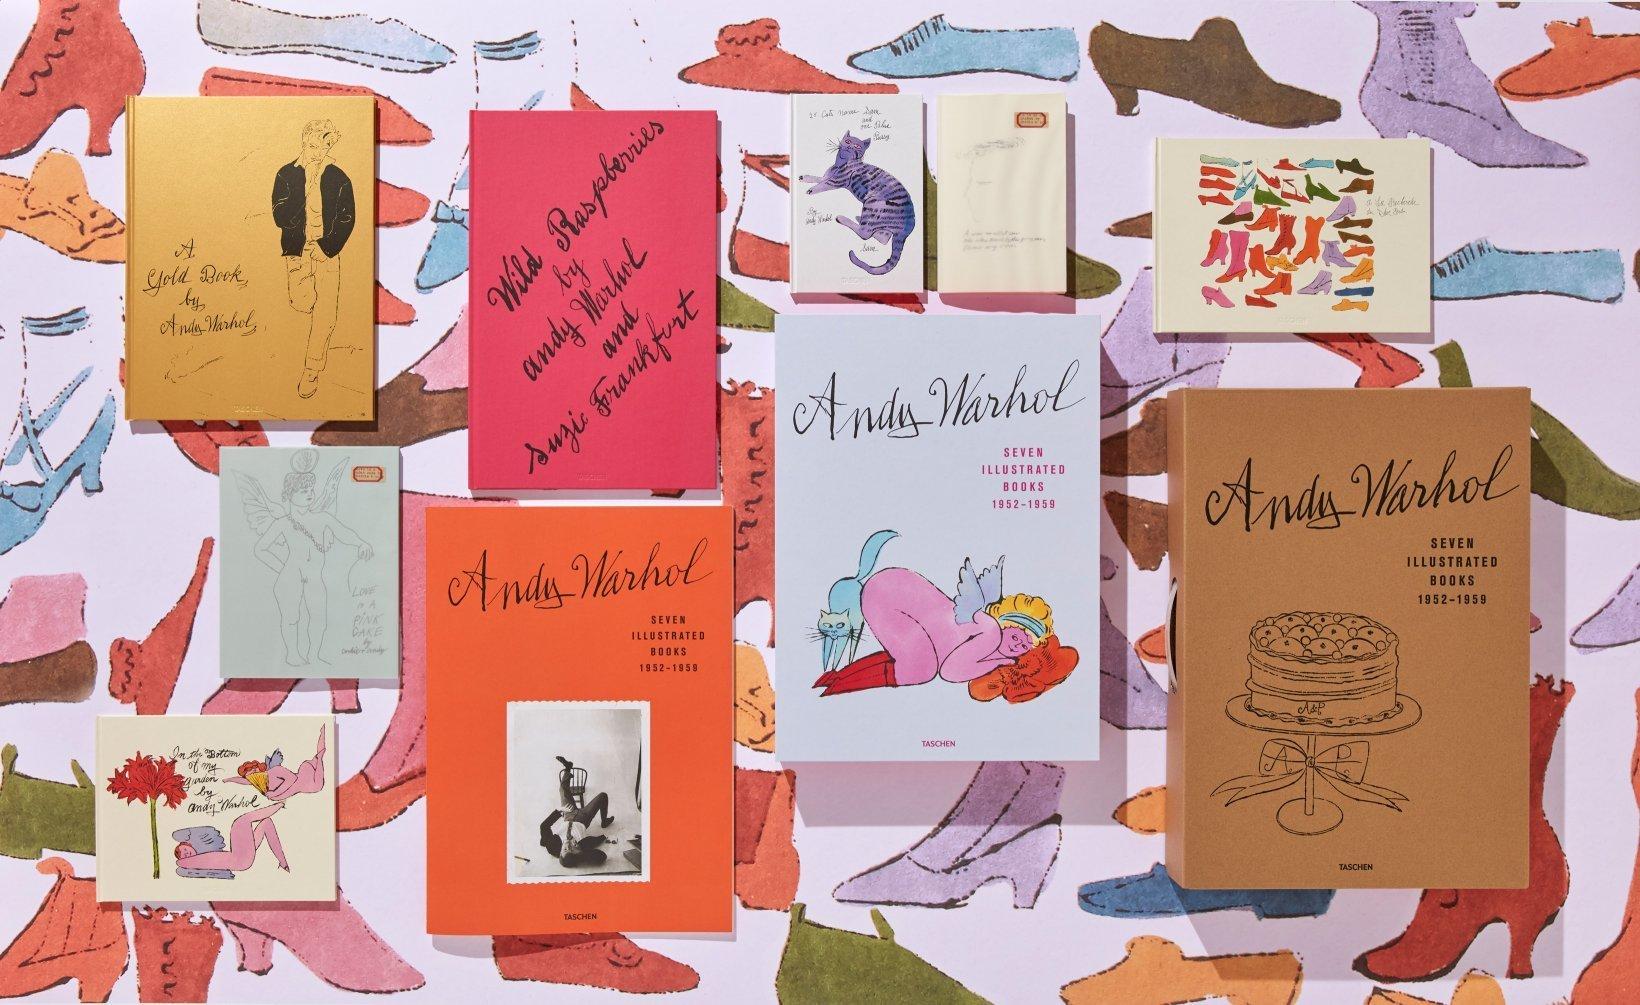 A unique reissue of Warhol’s classic 1950s illustrated books.
In 1950s New York, before he became one of the most famous names of the 20th century, Andy Warhol was already a skilled and successful commercial artist. During this time, as part of his